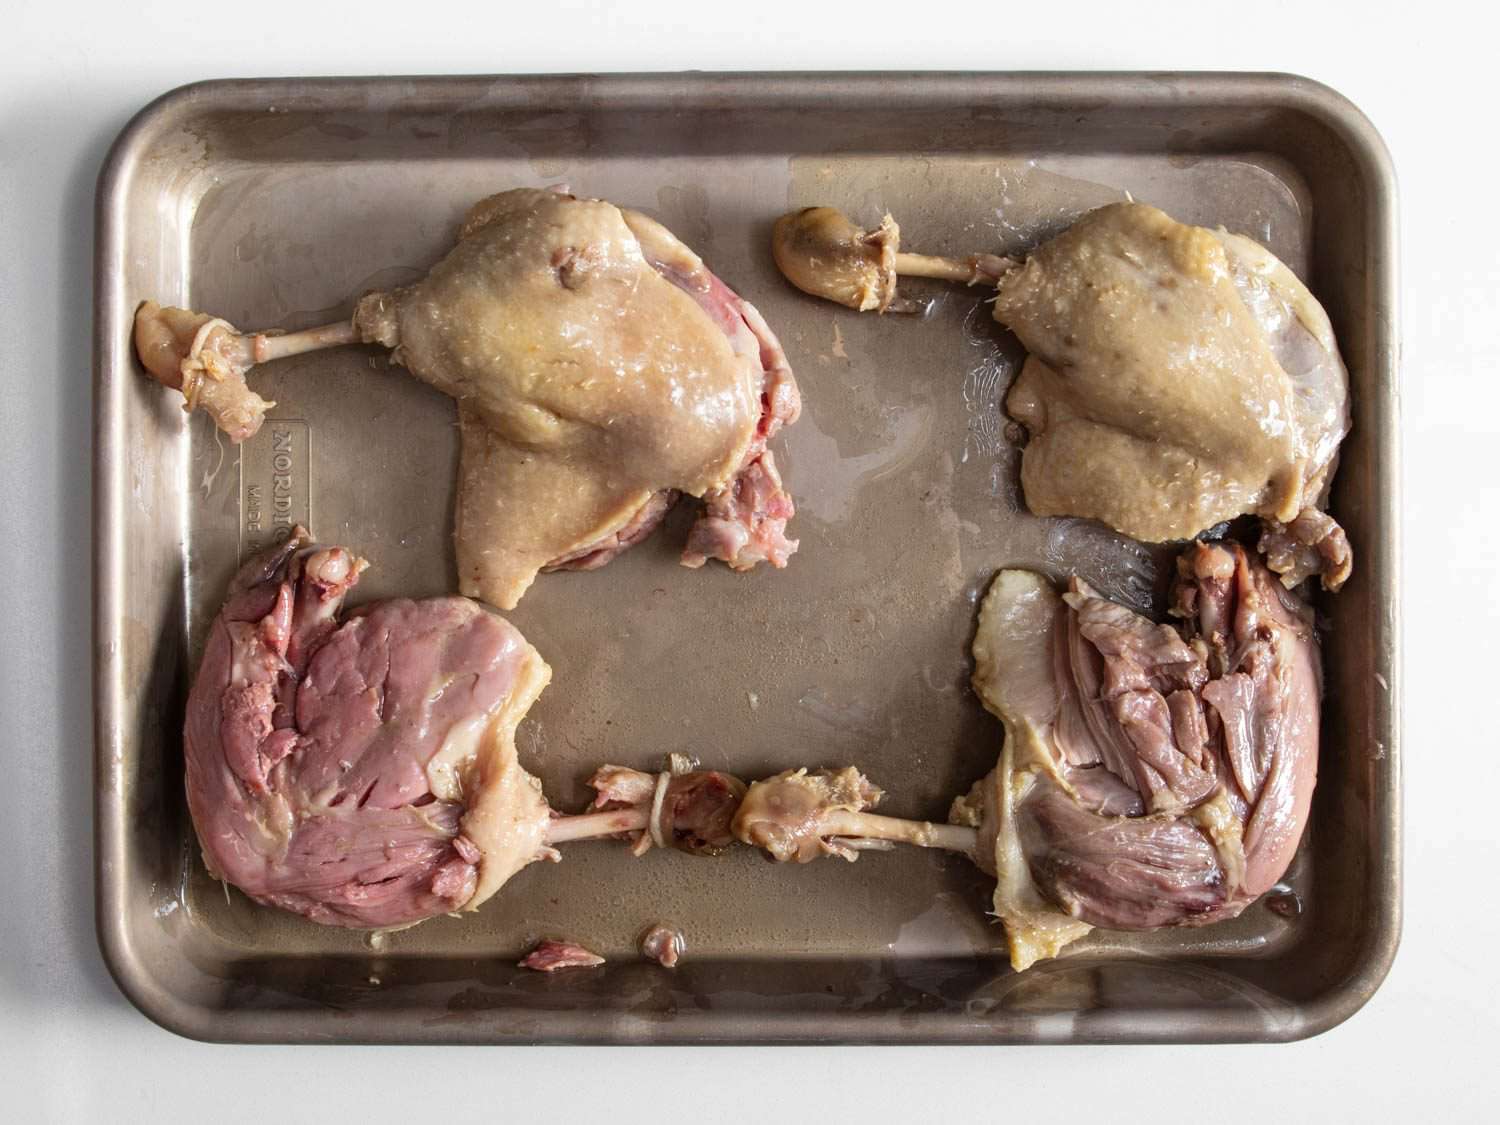 Overhead comparing duck confit made with legs cured with pink salt and kosher salt, and legs cured with just kosher salt. The meat on legs cured with pink salt is rosy, while salt-cured legs are brown.